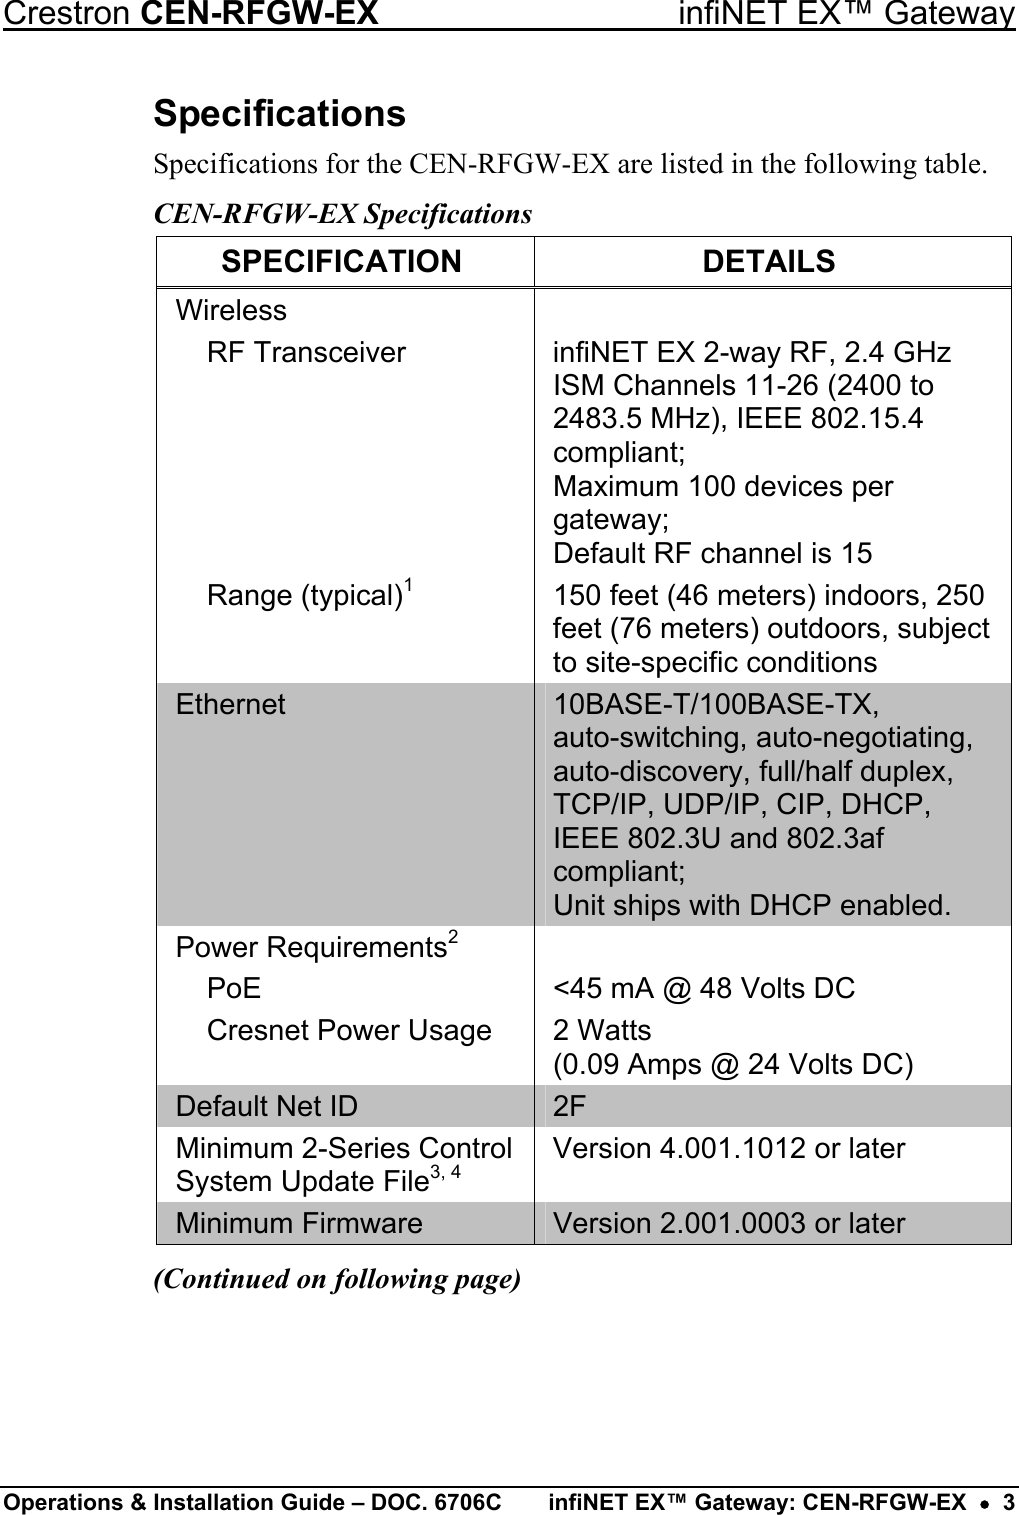 Crestron CEN-RFGW-EX  infiNET EX™ Gateway Specifications Specifications for the CEN-RFGW-EX are listed in the following table. CEN-RFGW-EX Specifications SPECIFICATION DETAILS Wireless    RF Transceiver  infiNET EX 2-way RF, 2.4 GHz ISM Channels 11-26 (2400 to 2483.5 MHz), IEEE 802.15.4 compliant; Maximum 100 devices per gateway; Default RF channel is 15  Range (typical)1  150 feet (46 meters) indoors, 250 feet (76 meters) outdoors, subject to site-specific conditions Ethernet  10BASE-T/100BASE-TX,  auto-switching, auto-negotiating, auto-discovery, full/half duplex, TCP/IP, UDP/IP, CIP, DHCP, IEEE 802.3U and 802.3af compliant; Unit ships with DHCP enabled. Power Requirements2    PoE  &lt;45 mA @ 48 Volts DC   Cresnet Power Usage  2 Watts  (0.09 Amps @ 24 Volts DC) Default Net ID  2F Minimum 2-Series Control System Update File3, 4 Version 4.001.1012 or later Minimum Firmware  Version 2.001.0003 or later (Continued on following page)   Operations &amp; Installation Guide – DOC. 6706C  infiNET EX™ Gateway: CEN-RFGW-EX  •  3 